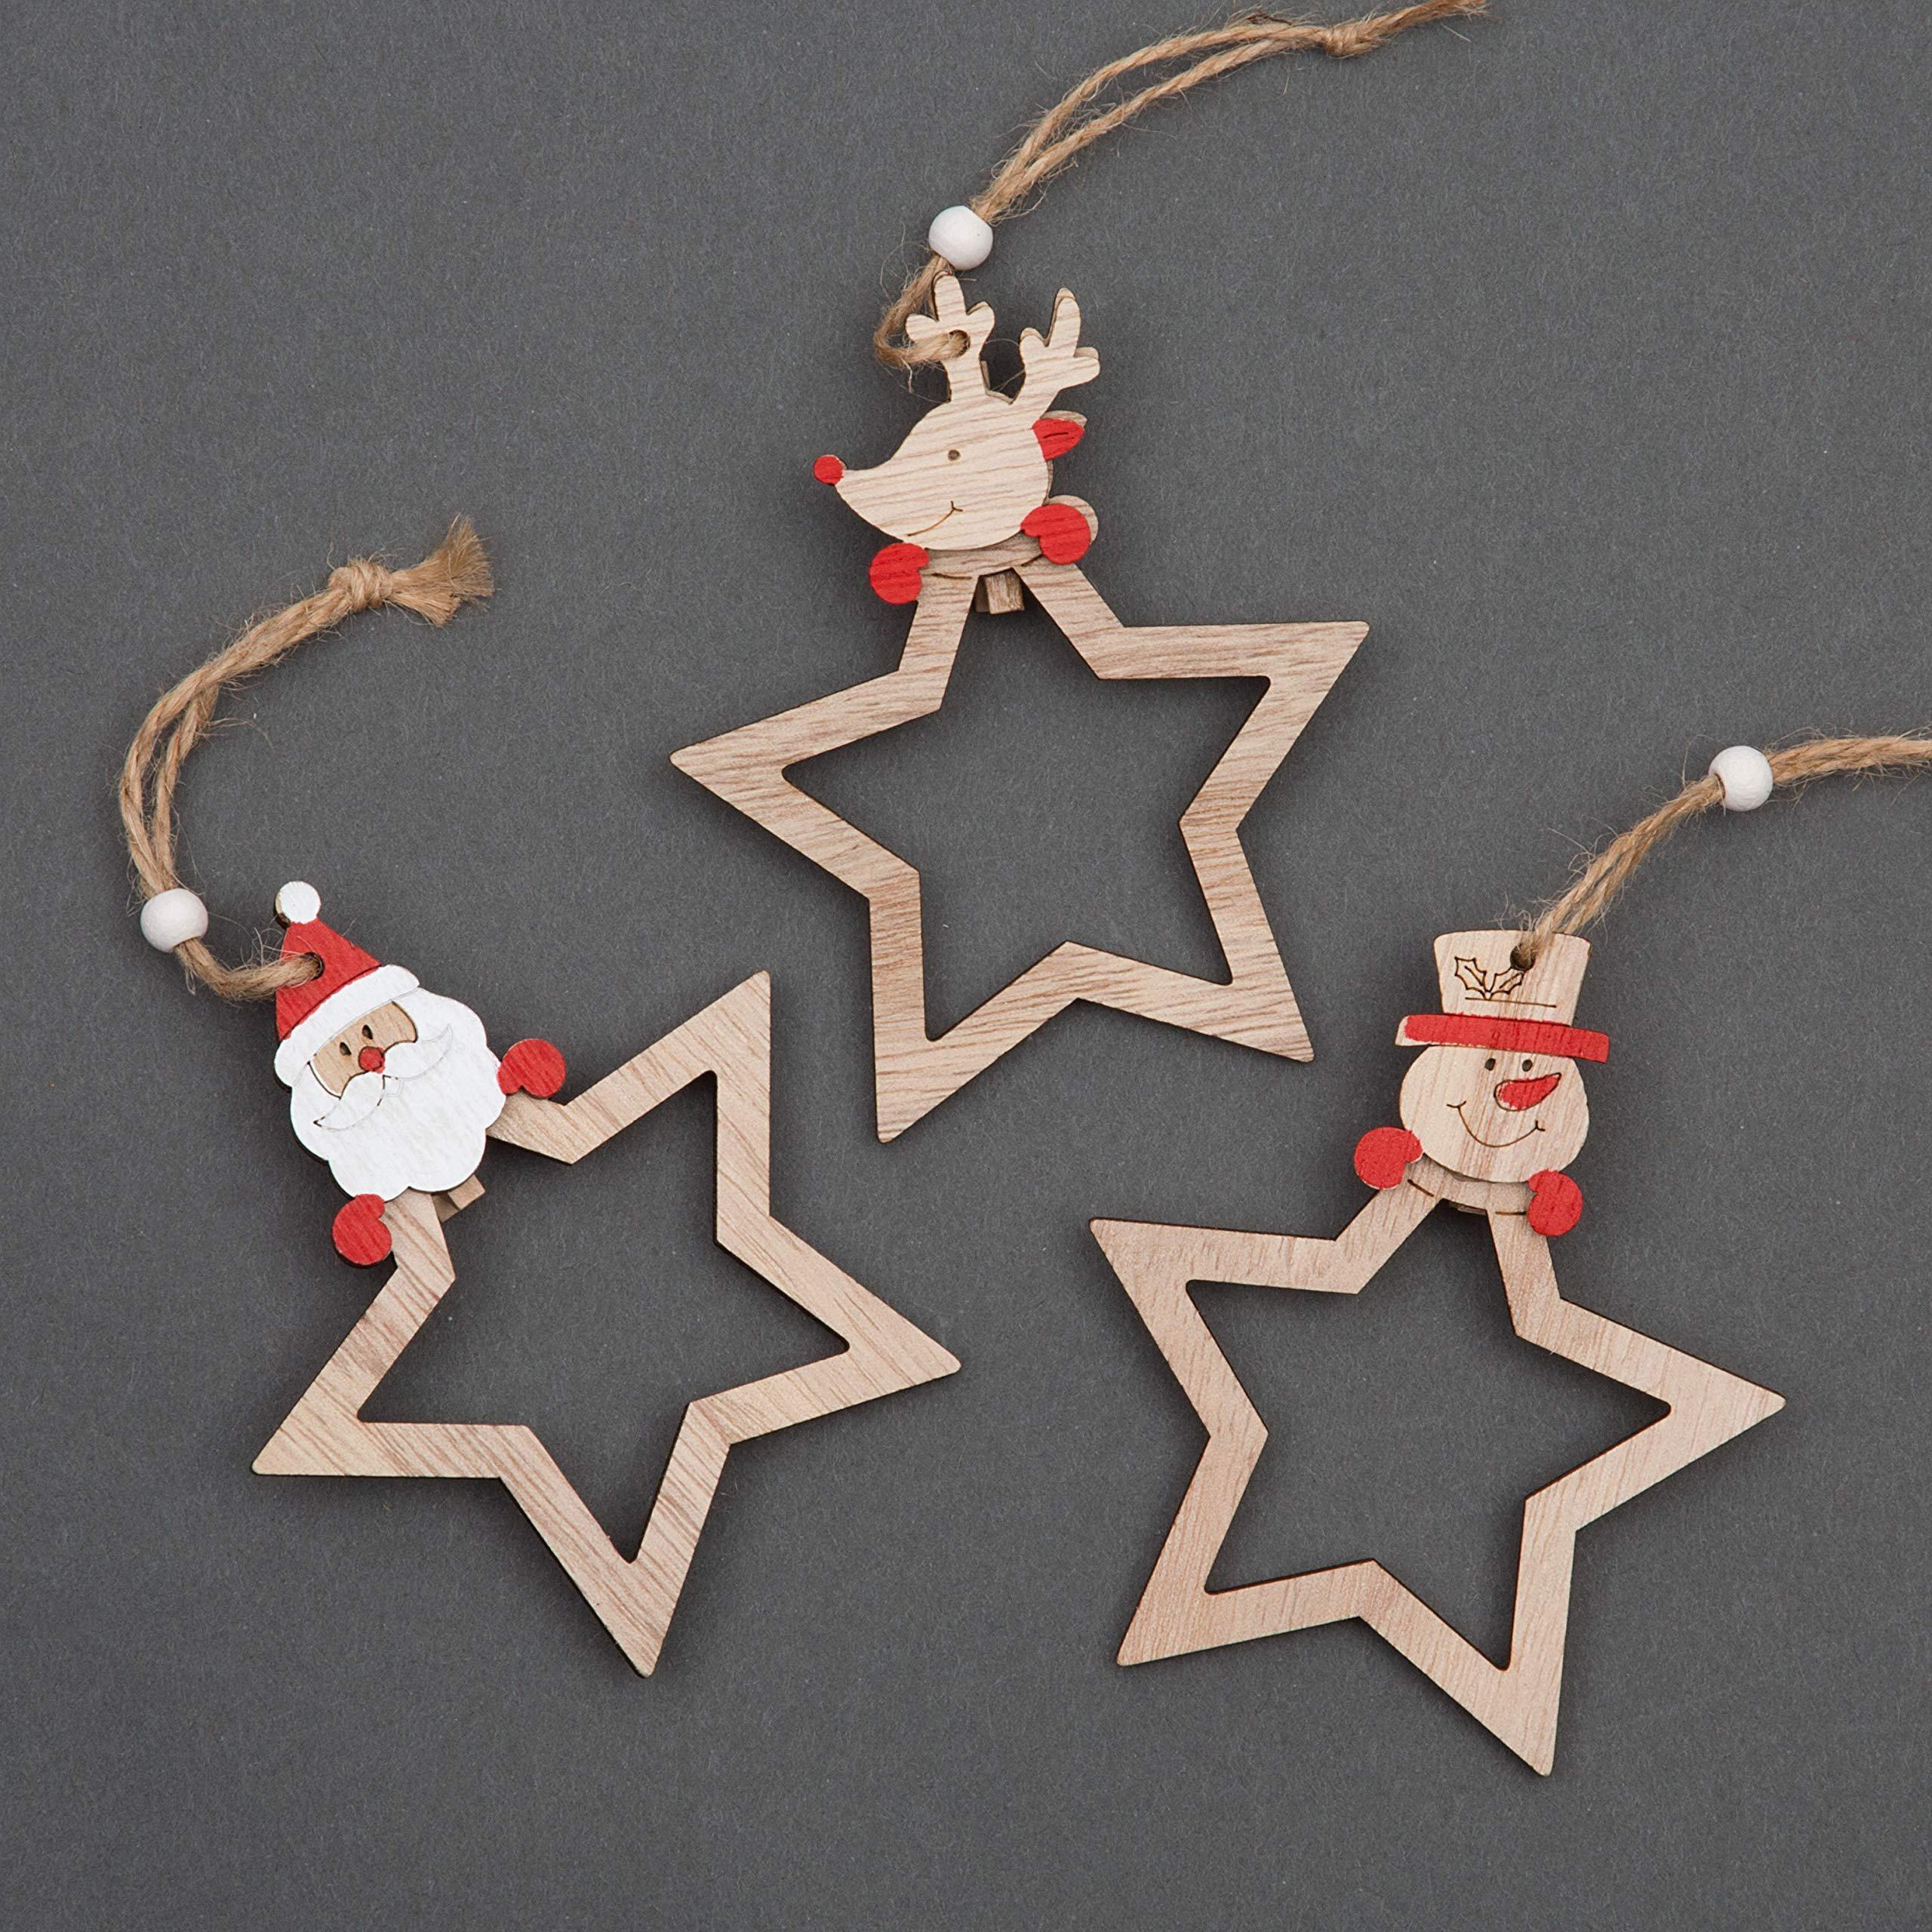 Christmas Tree Ornaments Wooden Aesthetic Hanging Decorations Star Shape 3Pcs - image 1